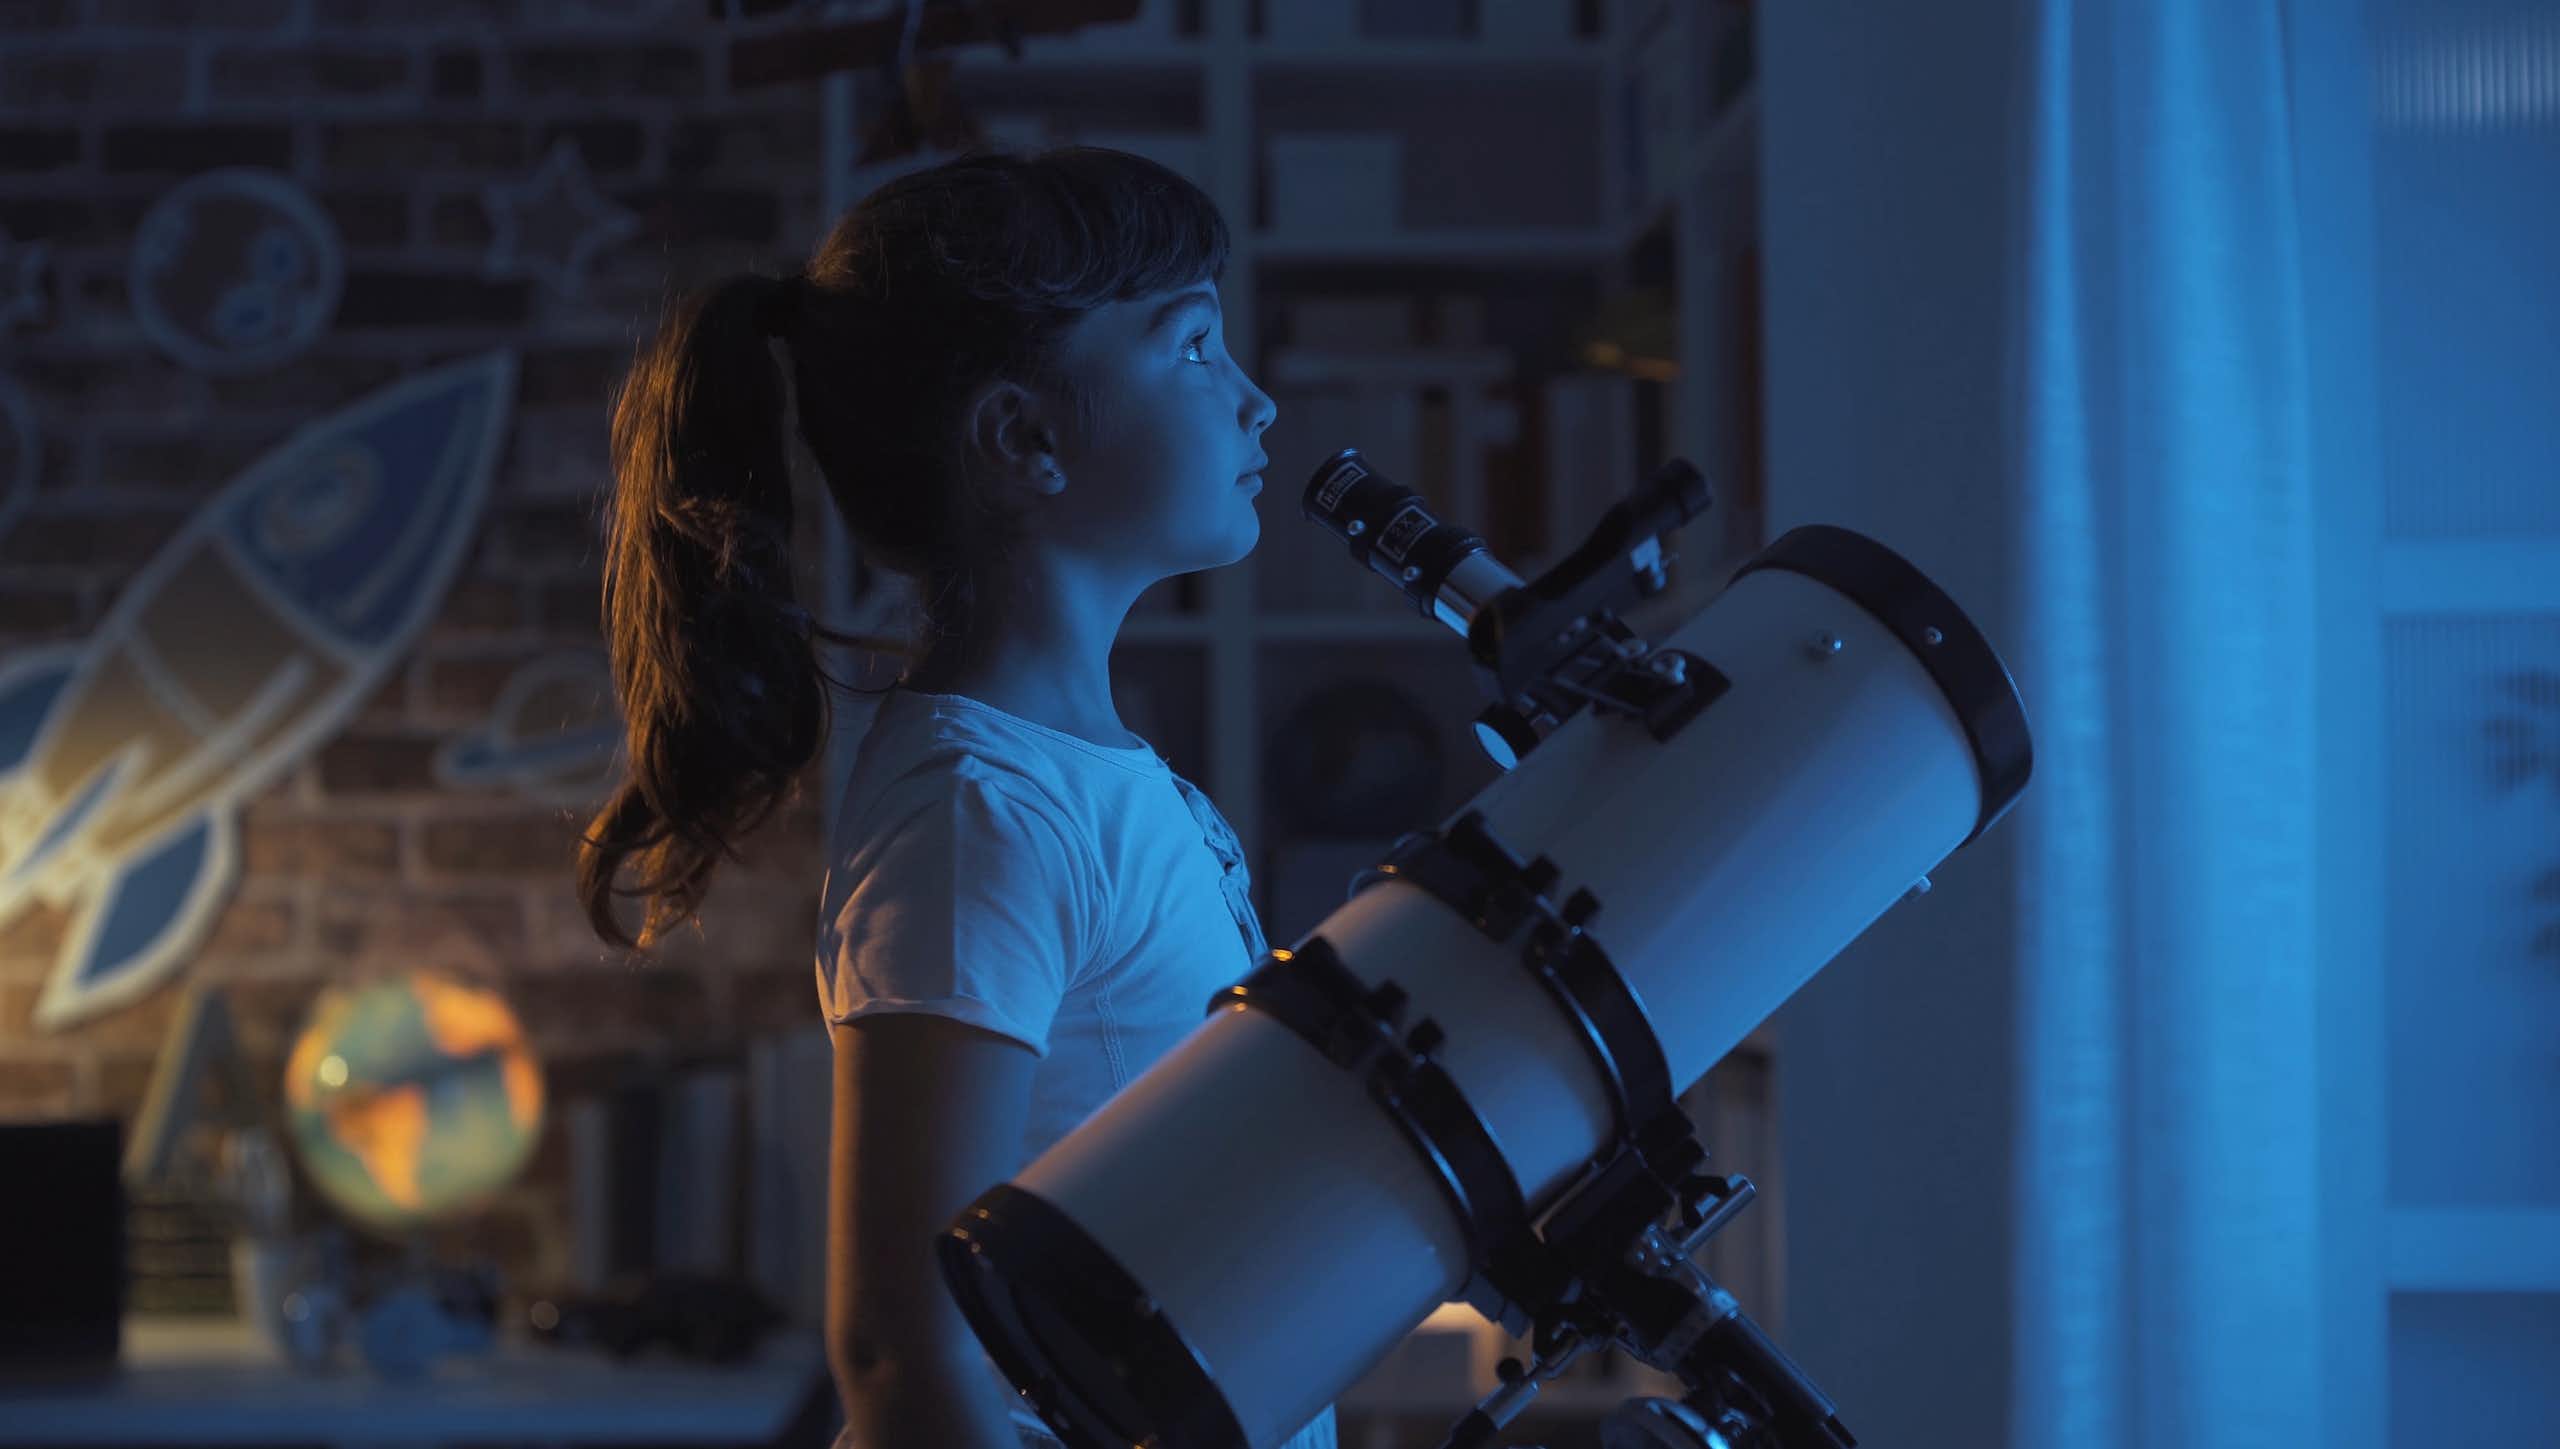 Girl standing by telescope looking out of window at night